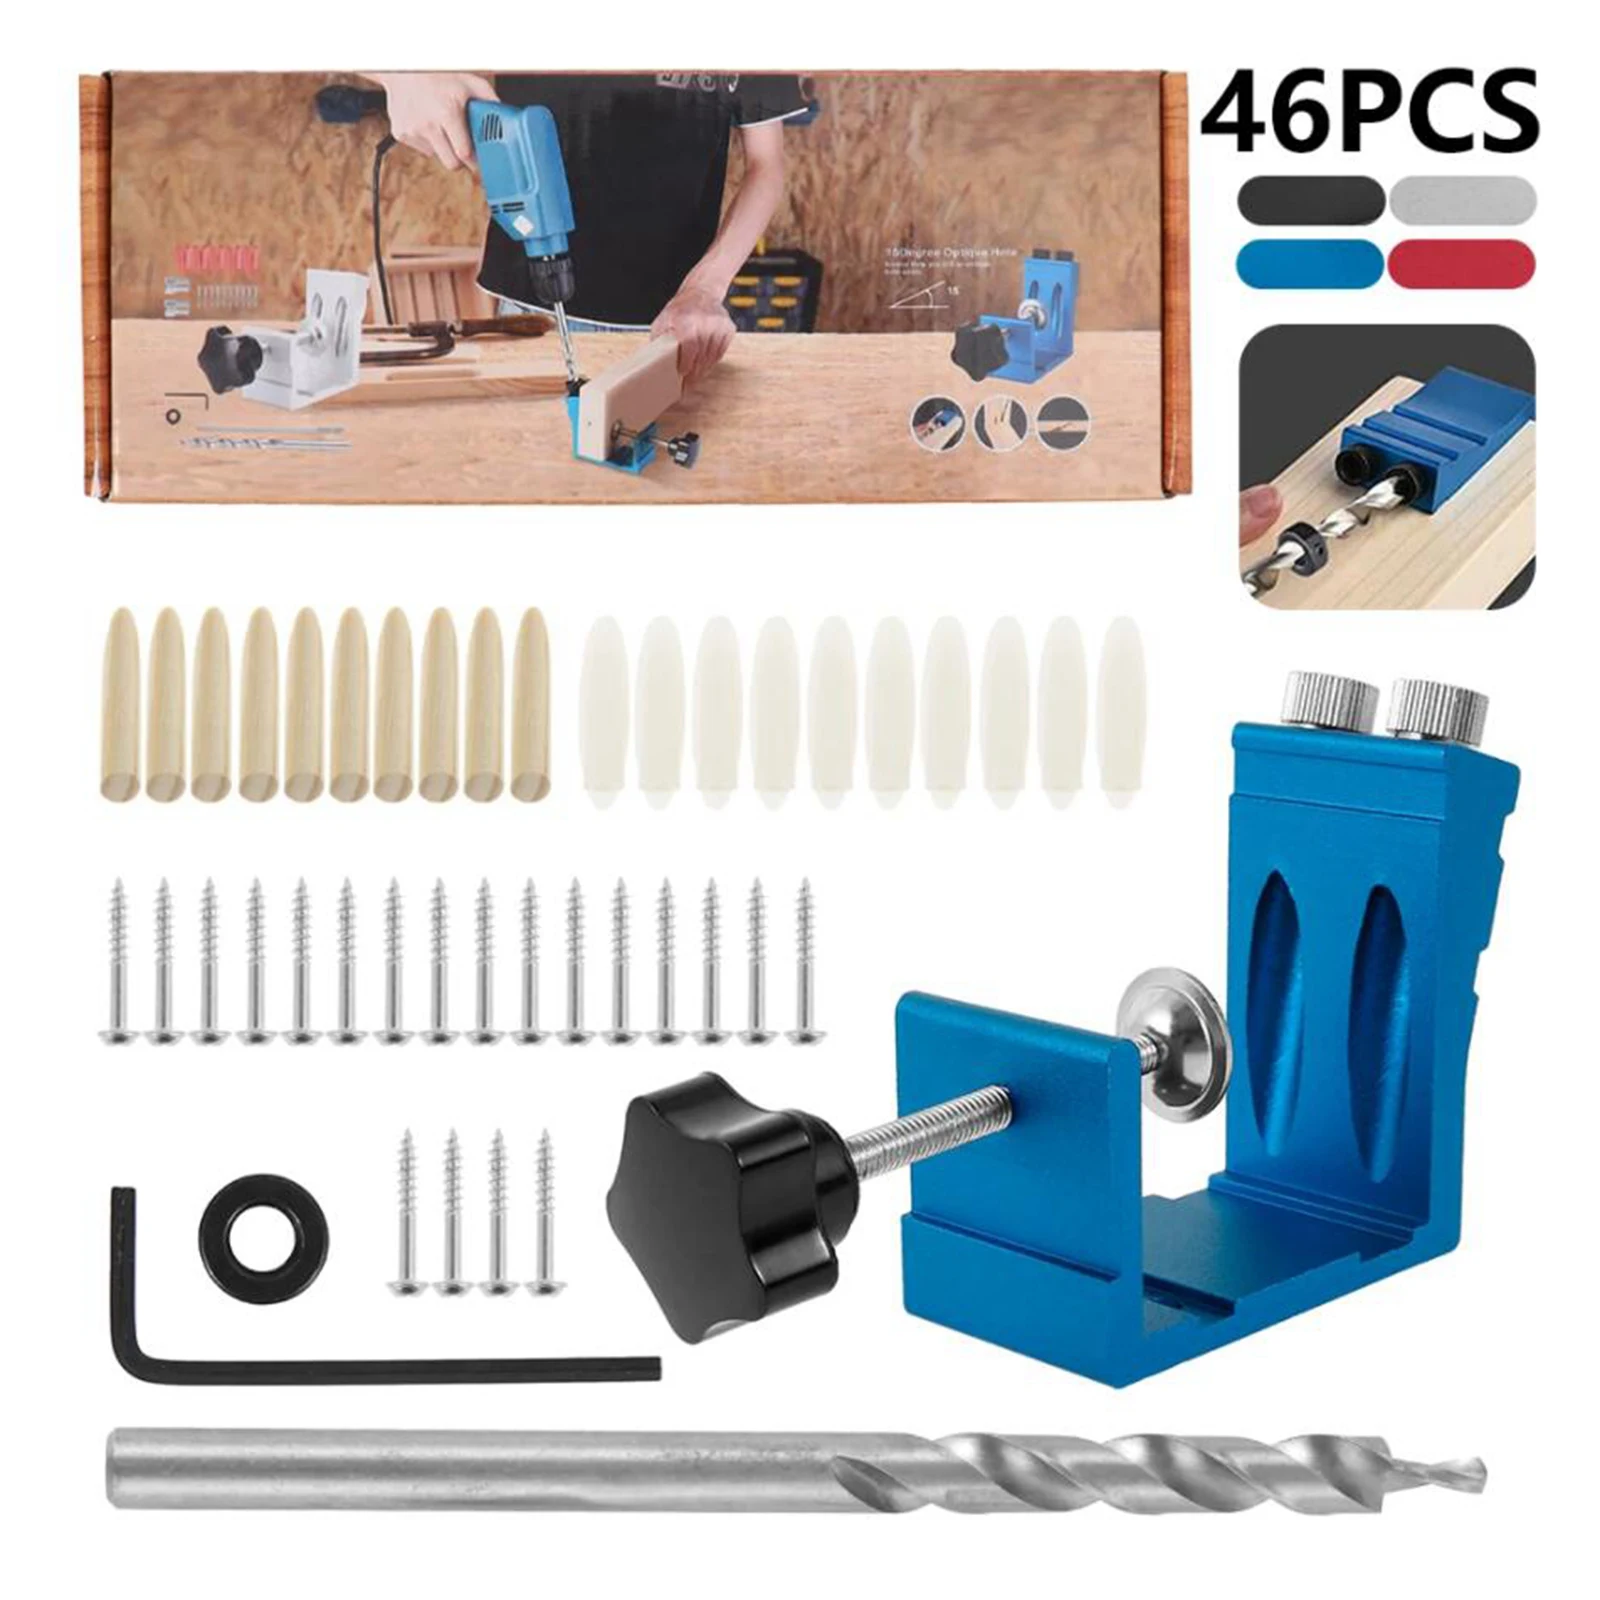 Carpenters Pocket Hole Jig Kit - Oblique Drill Joinery Screw Kit Woodwork Guides Joint Angle Tool Positioners